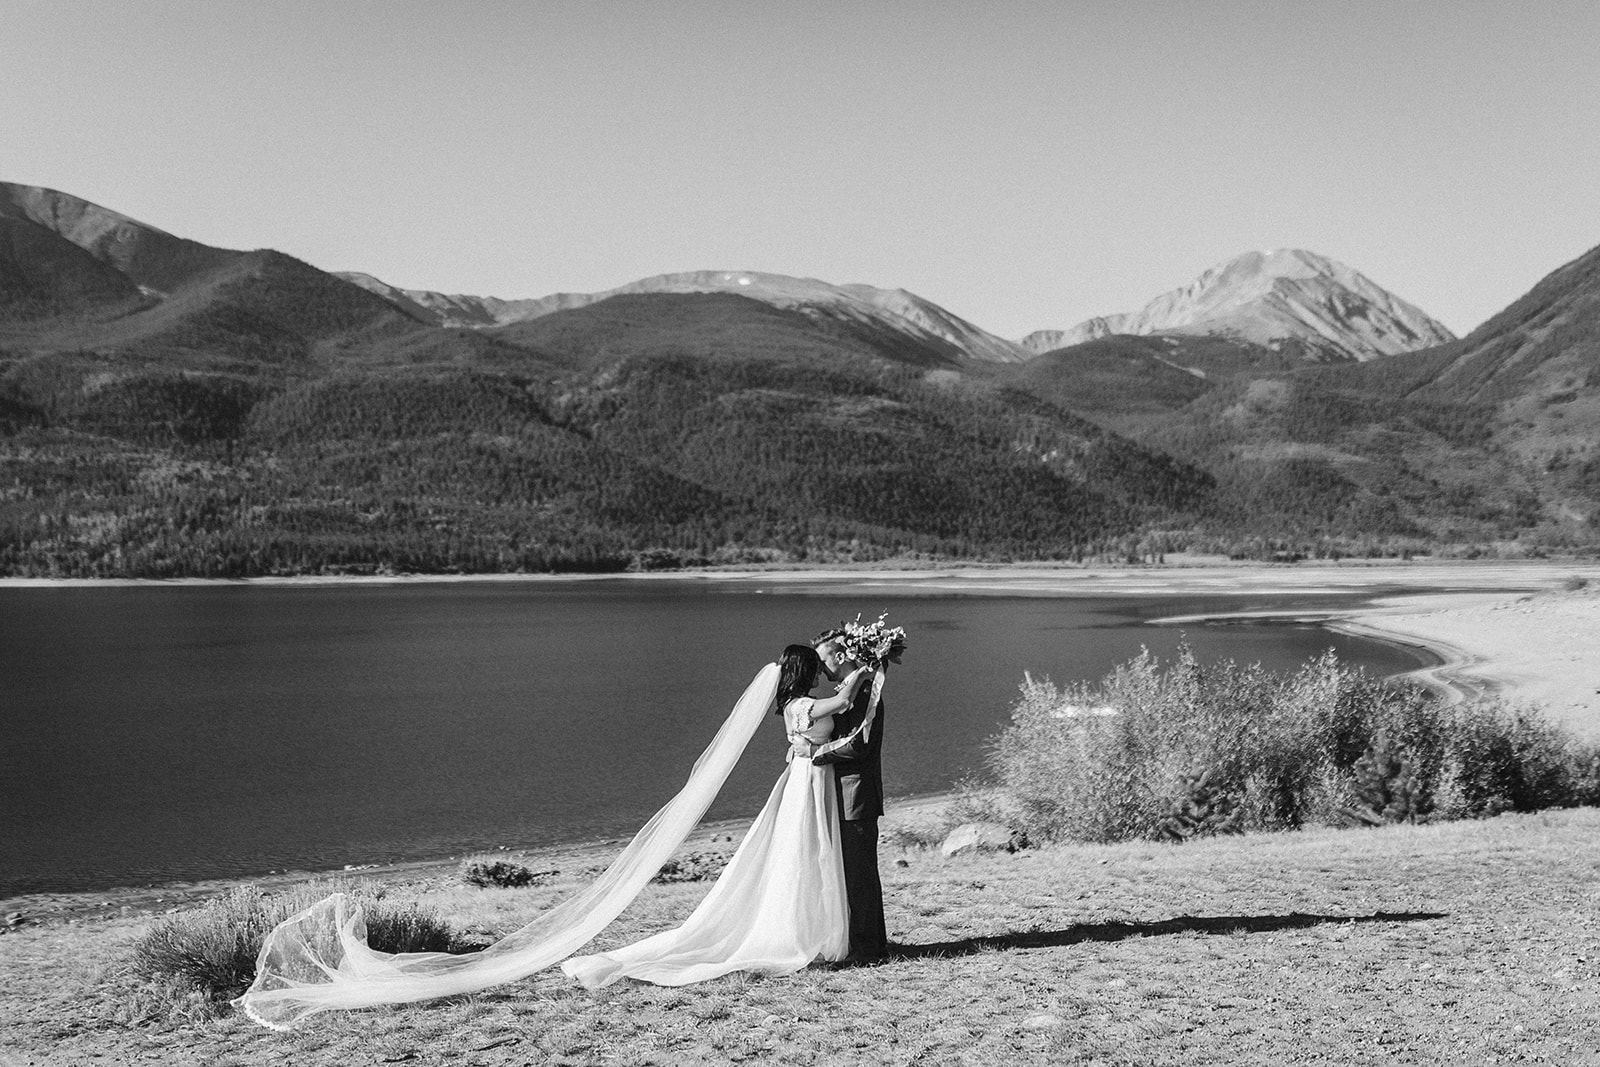 A bride and groom embrace in front of a mountain lake.